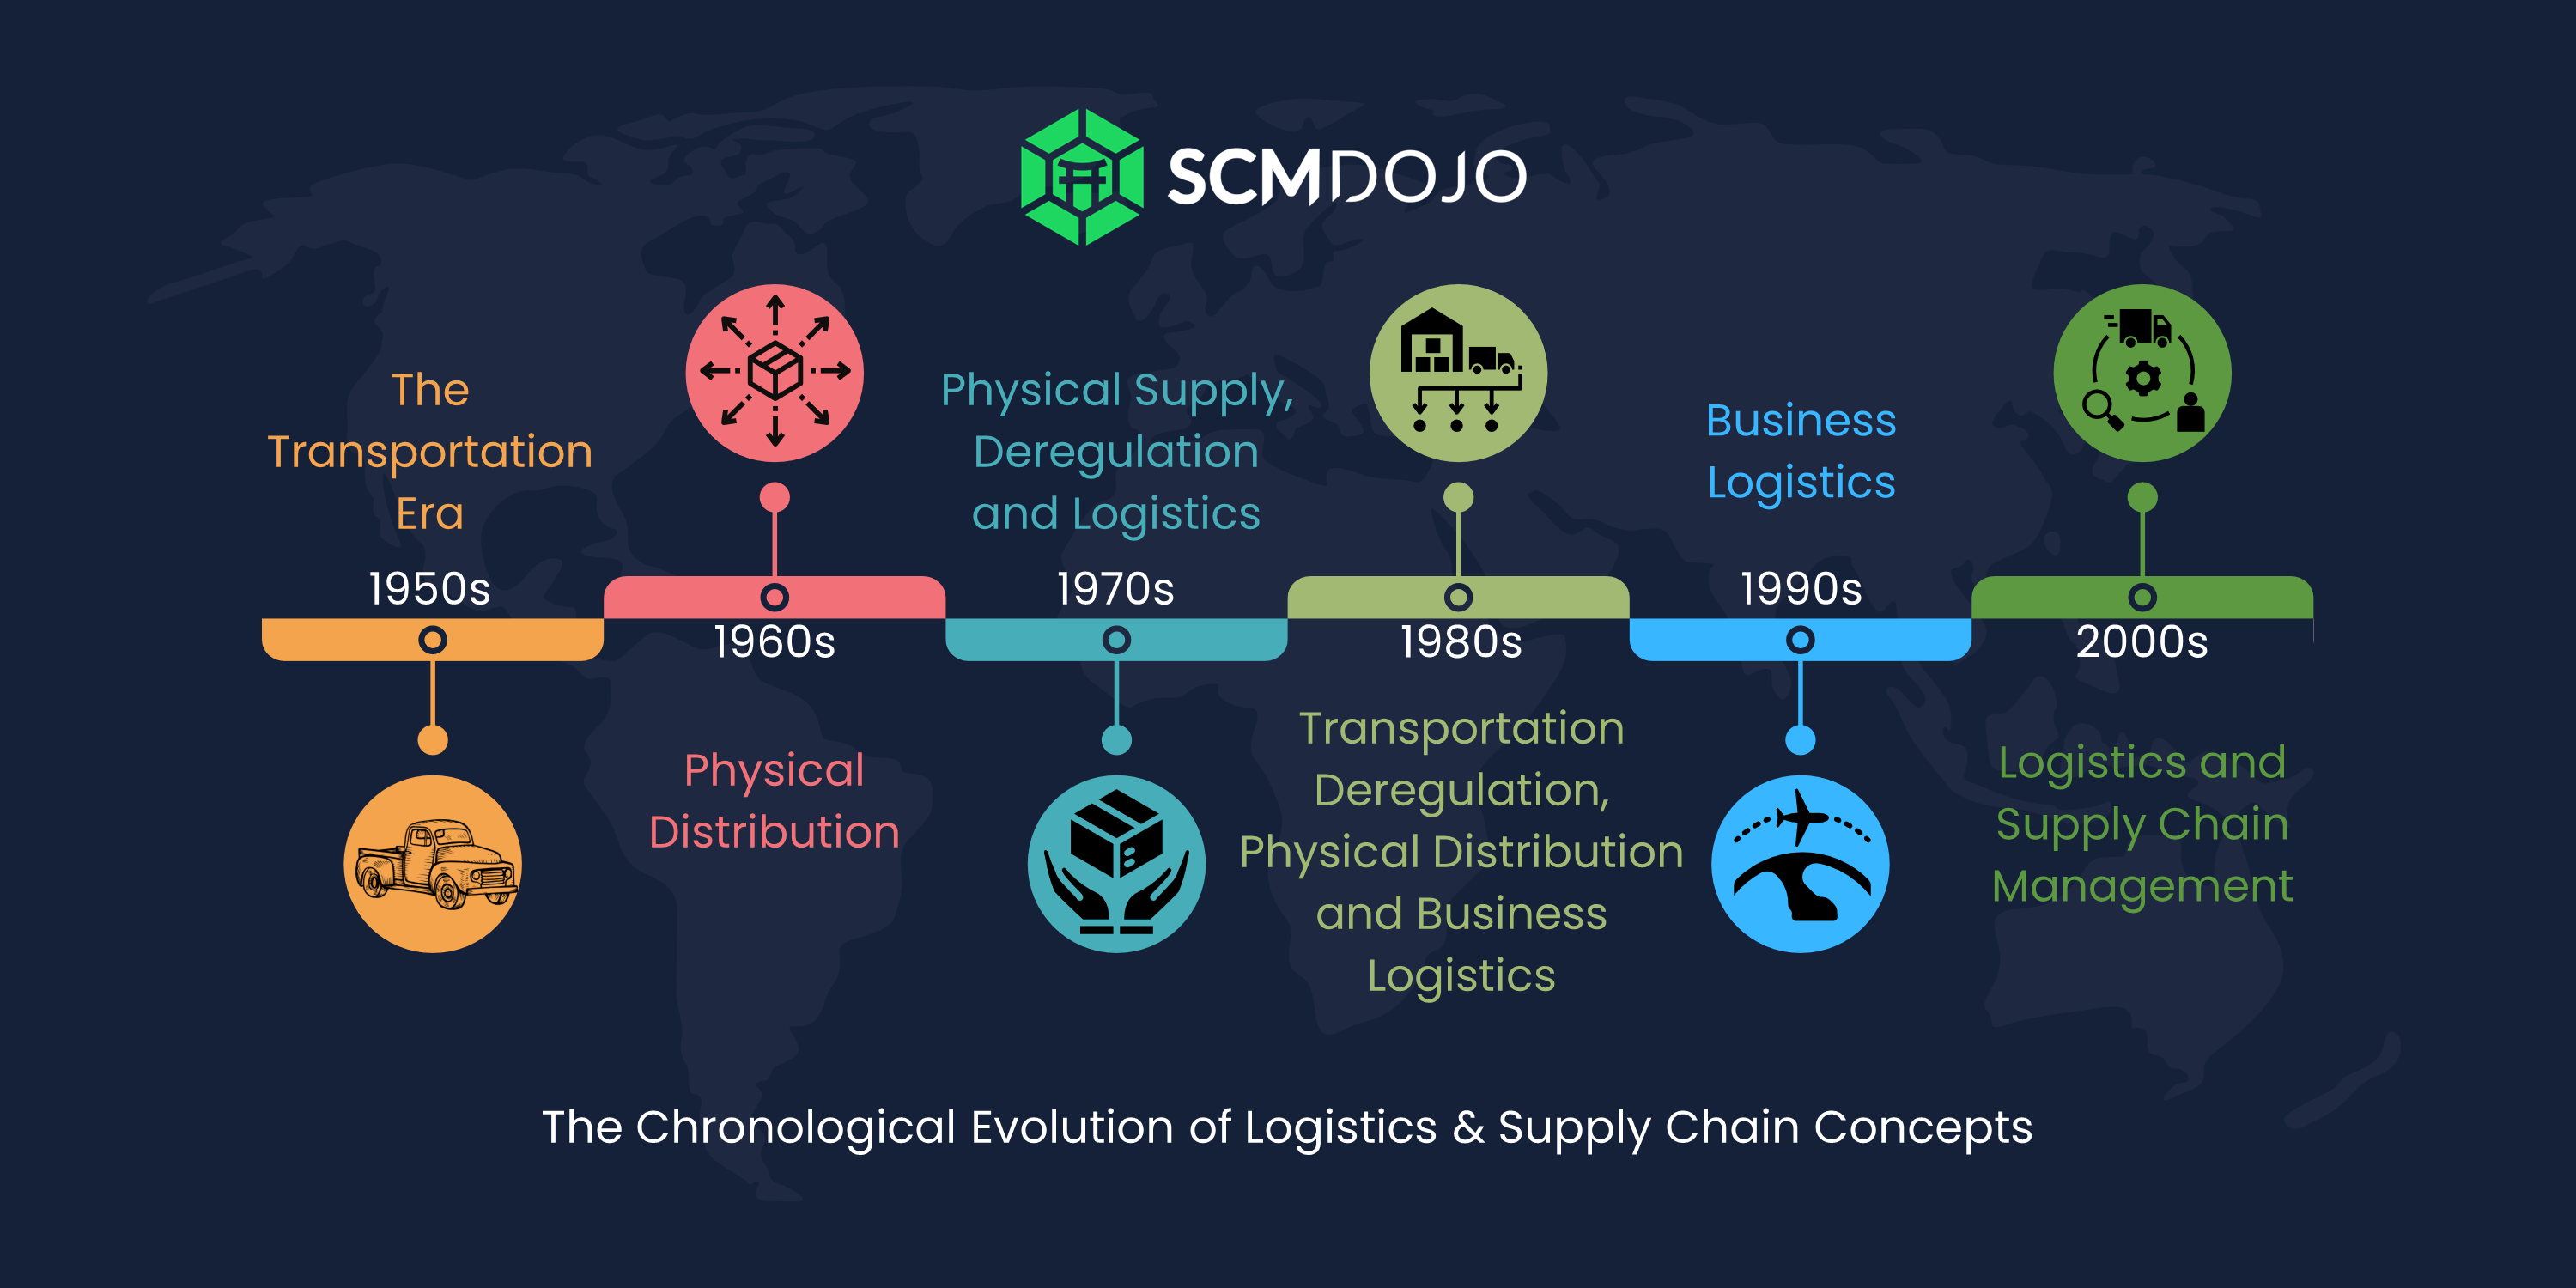 History of Logistics & Supply Chain Concepts